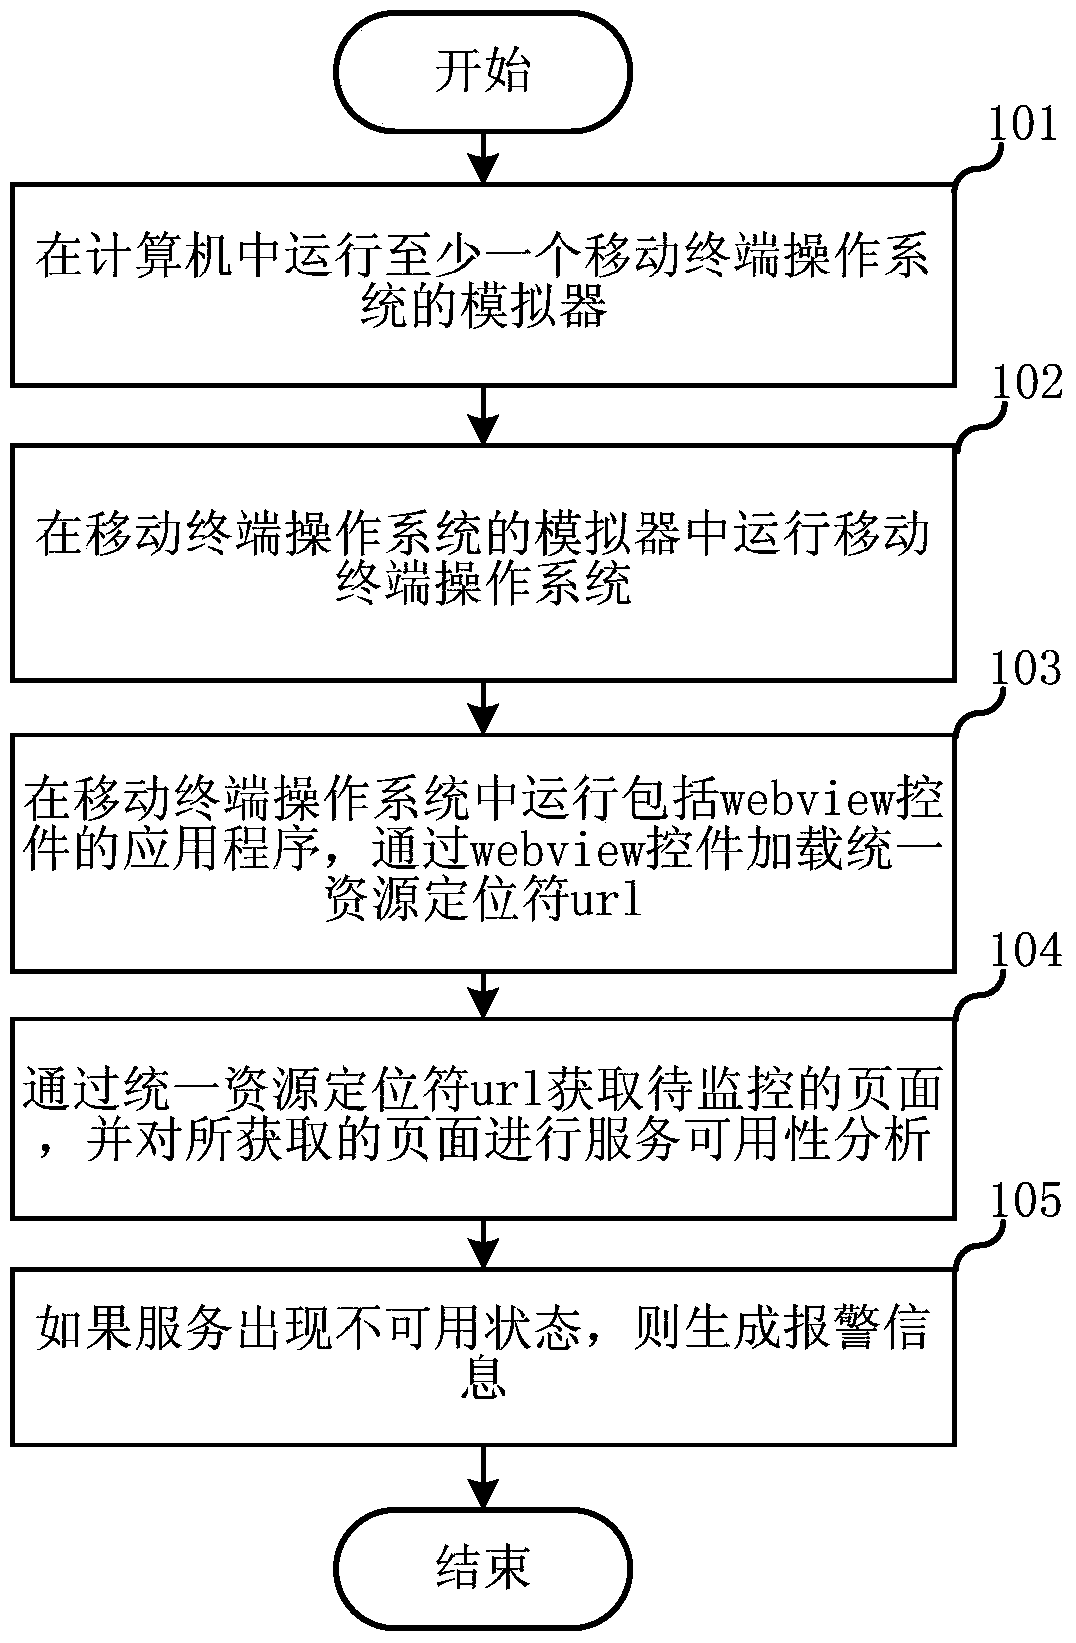 Method and system for providing real-time monitoring for webpage services of mobile terminals